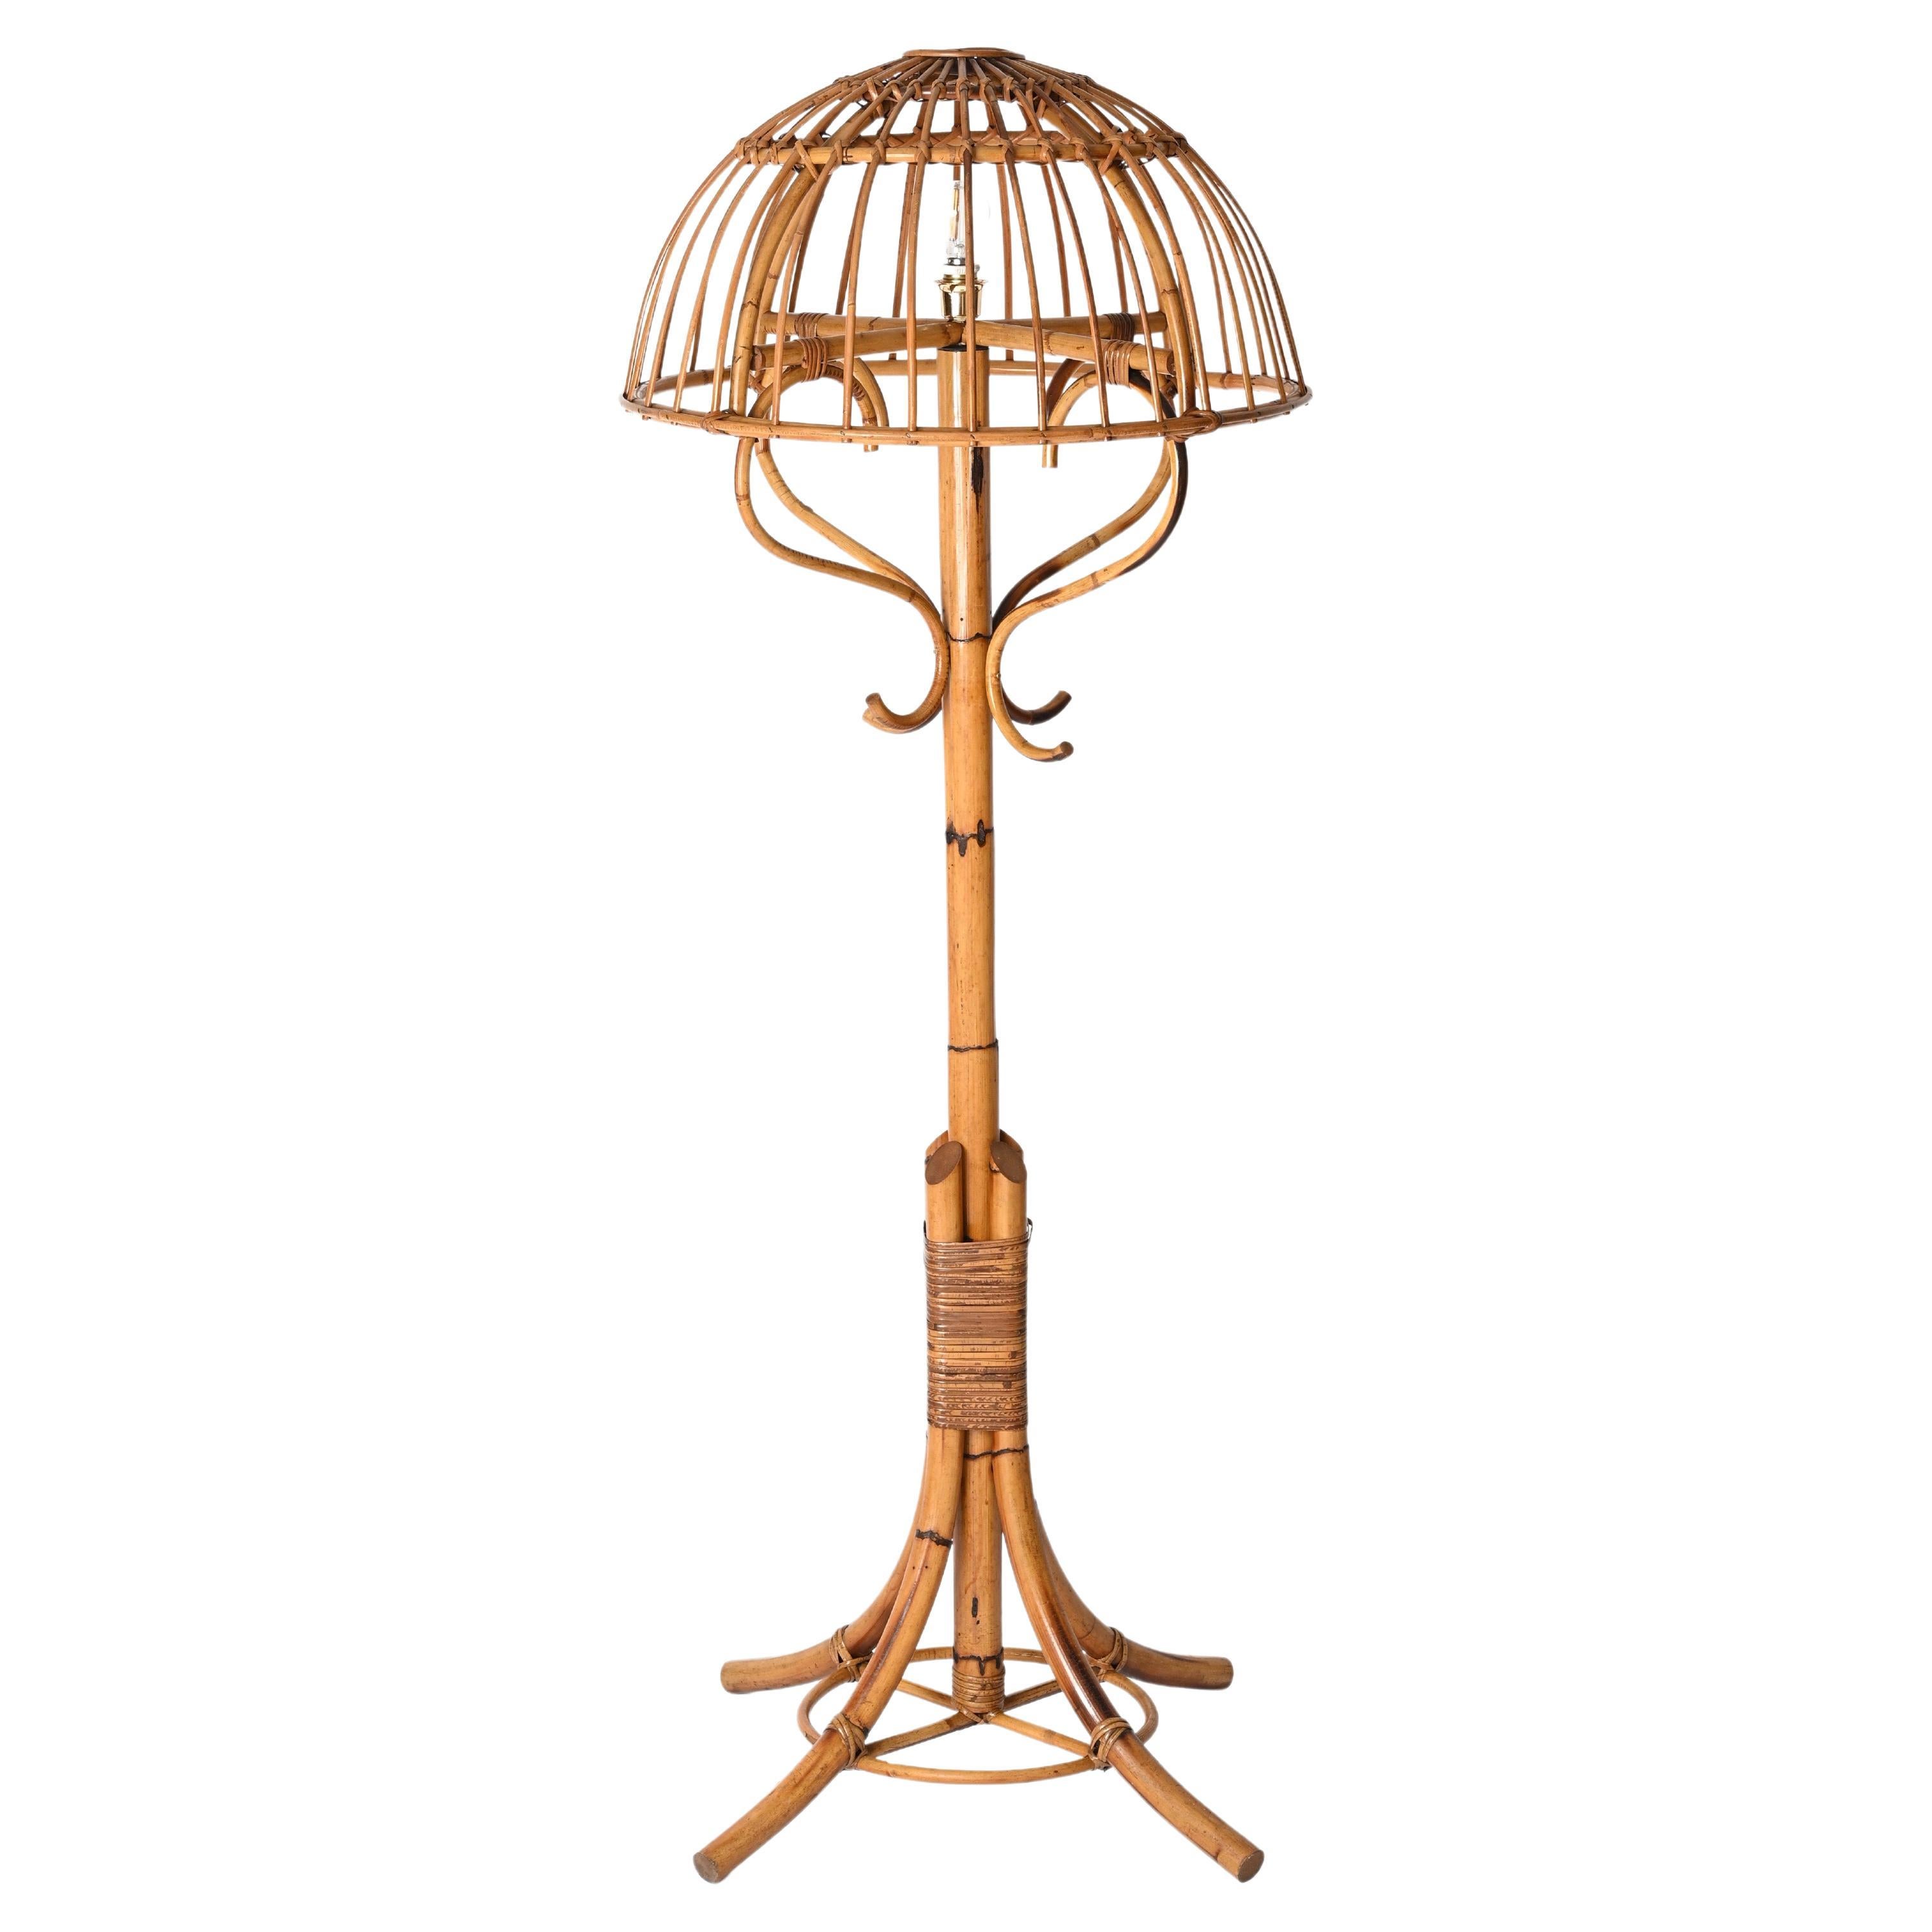 Lampadaire French Riviera en rotin, osier, bambou, style Sognot, Italie, années 1960